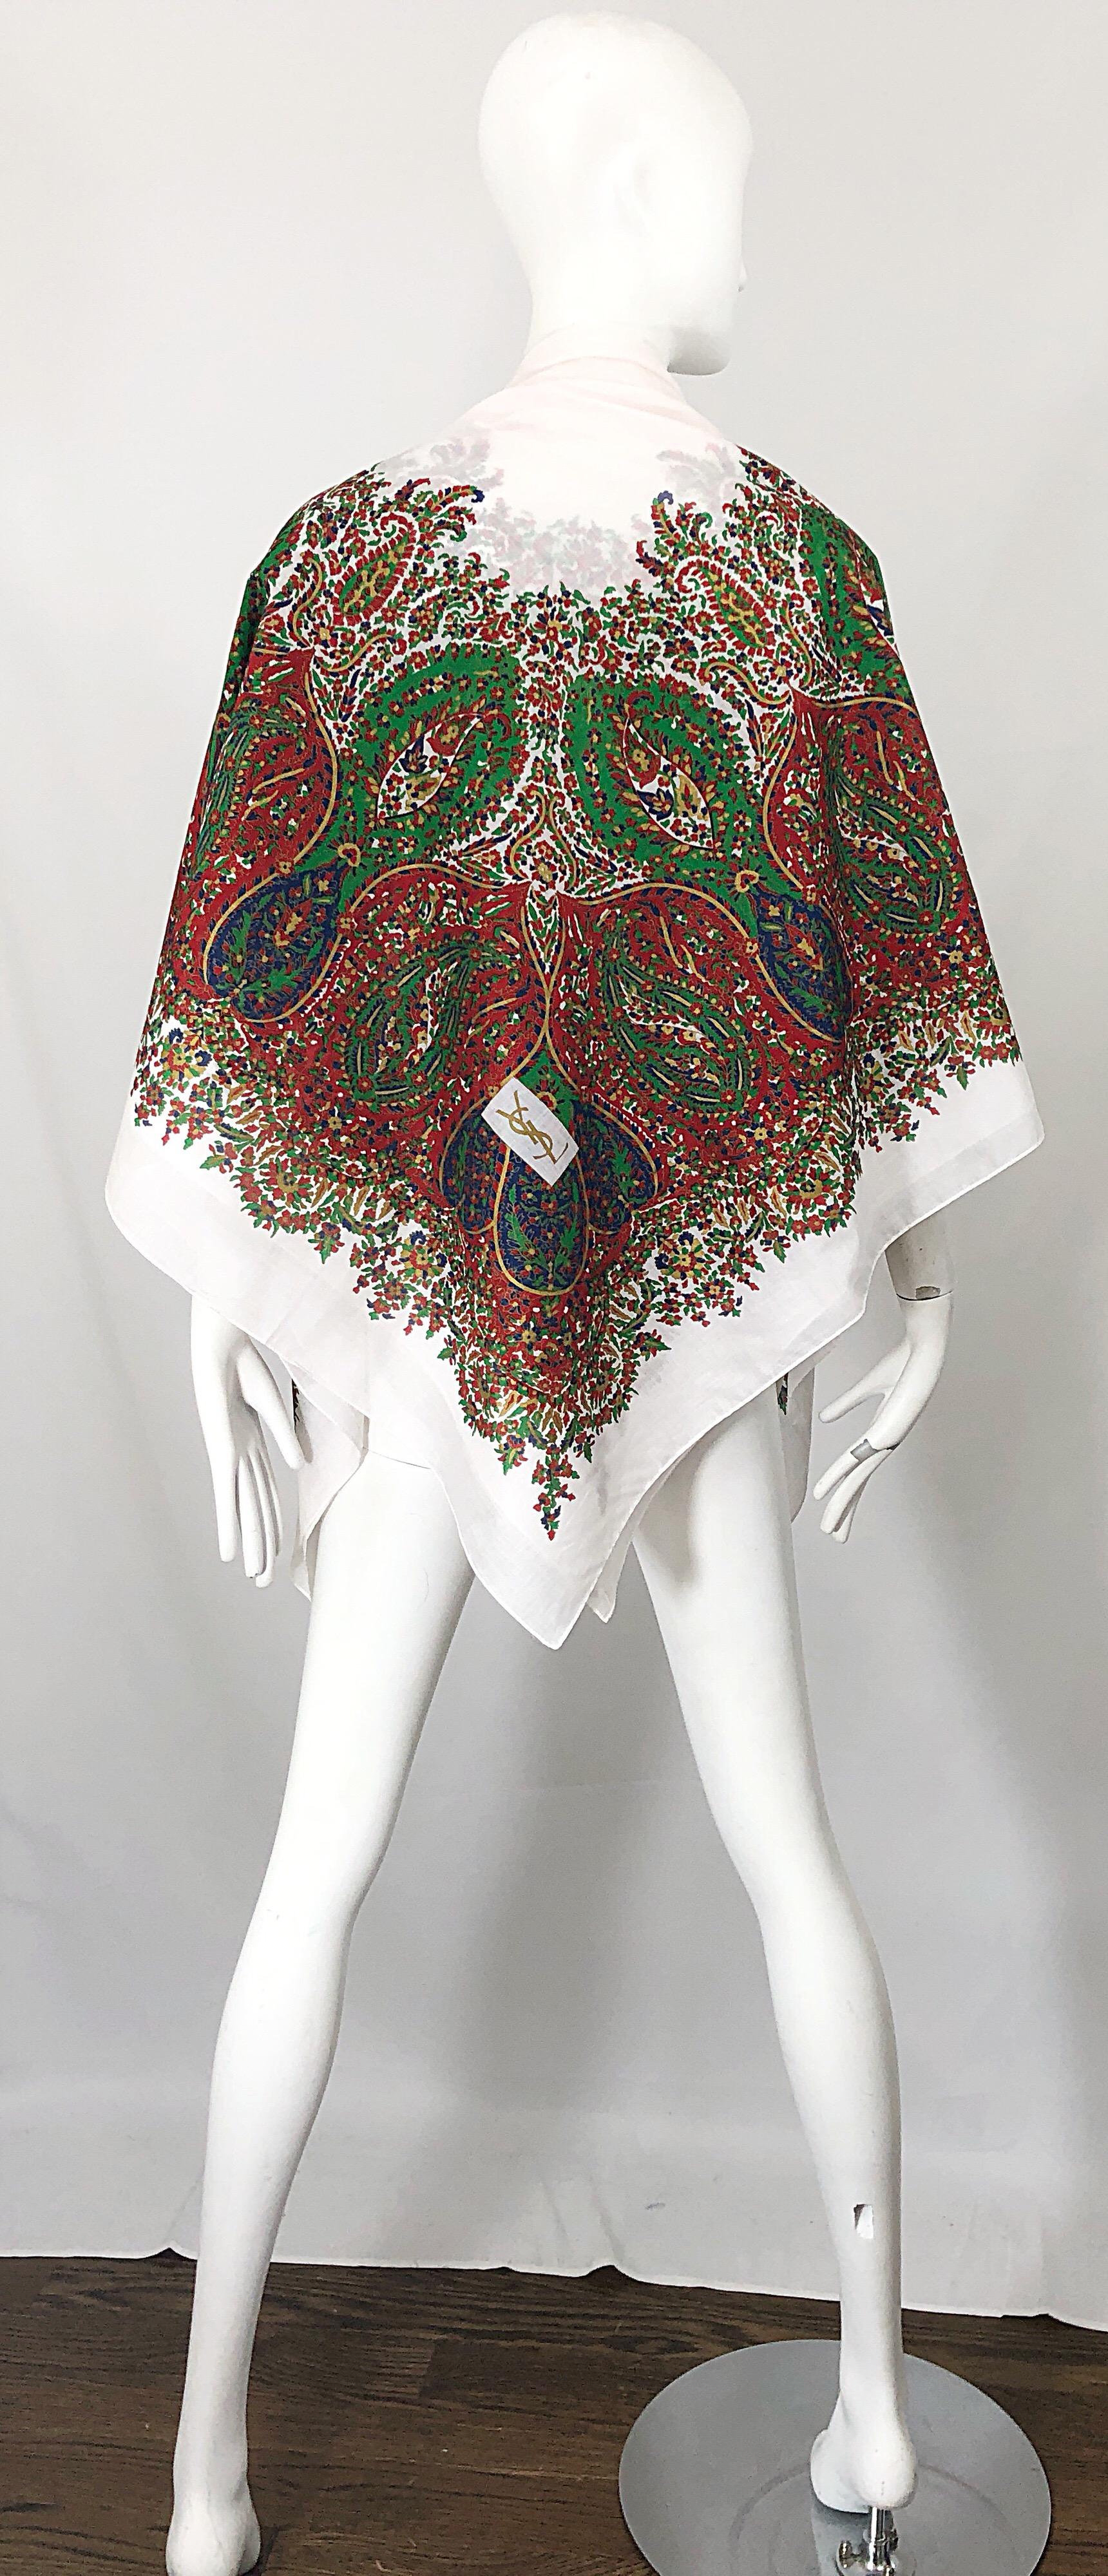 Vintage YVES SAINT LAURENT massive (55 inches by 55 inches) lightweight hand painted cotton voile shawl / scarf! Features vibrant colors of red, gold, green, blue and white throughout. Gold YSL logo at bottom right corner. Can be worn many different